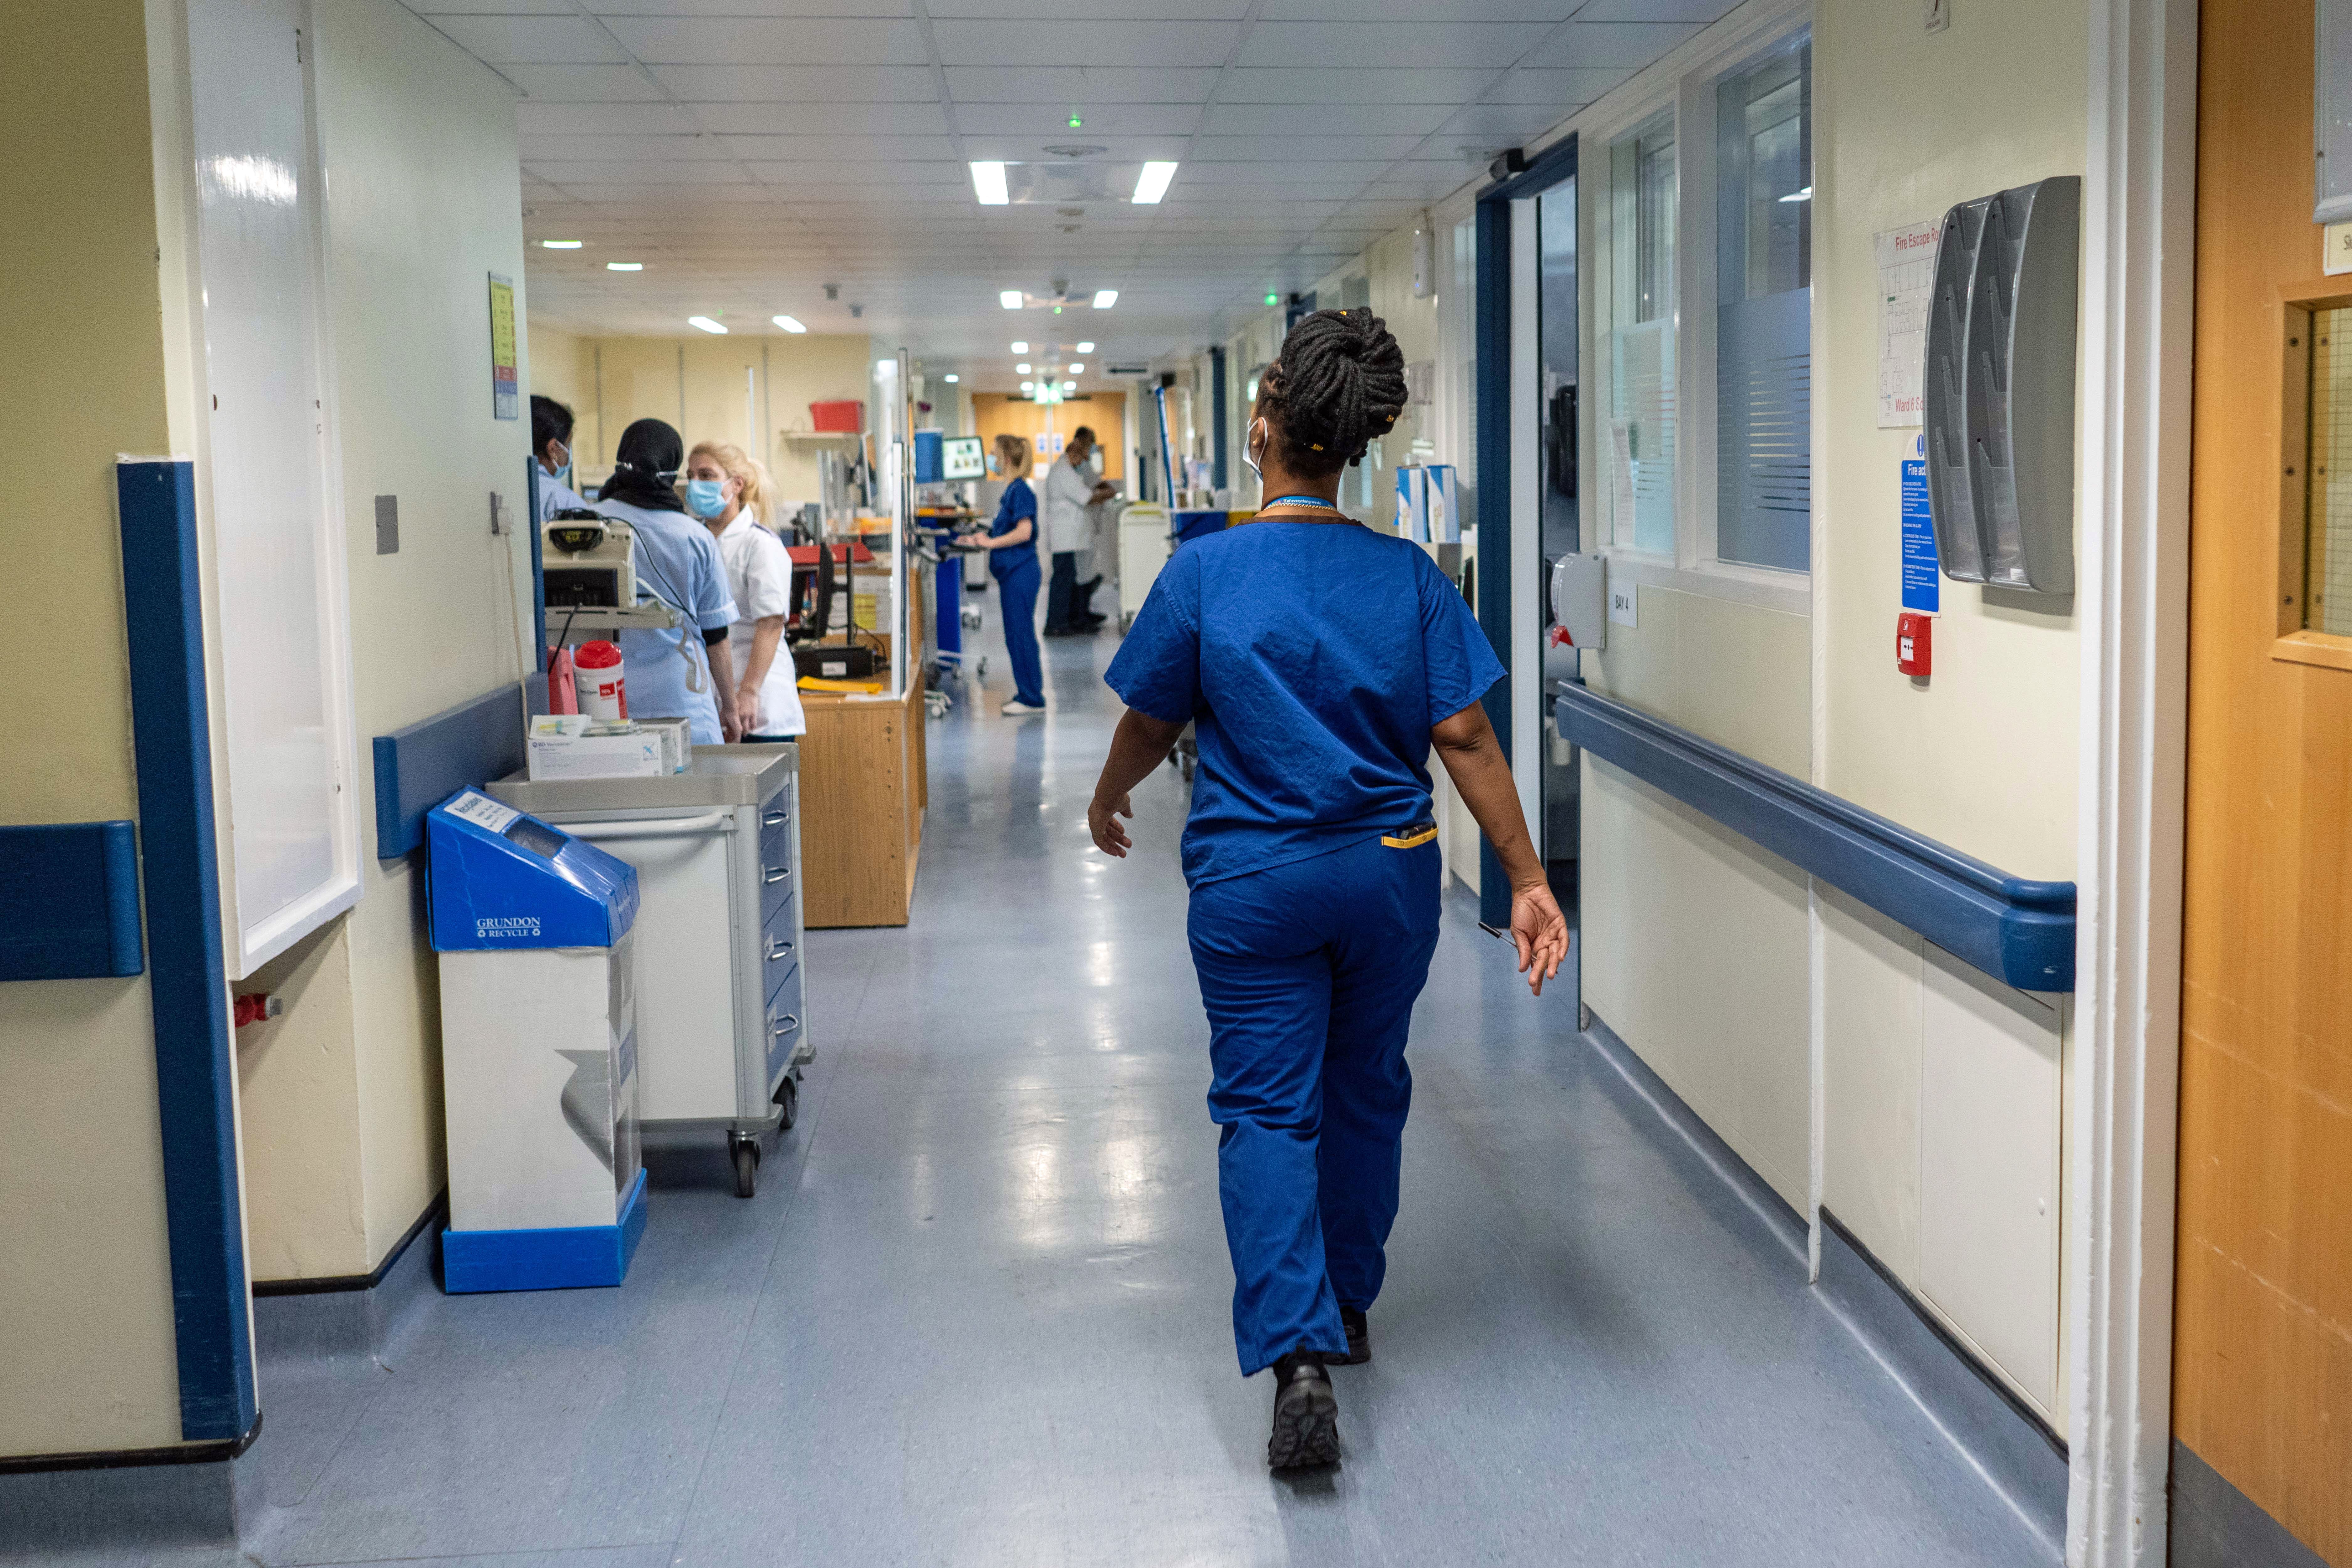 ‘Patients are routinely being cared for in corridors and other inappropriate settings, says the RCN